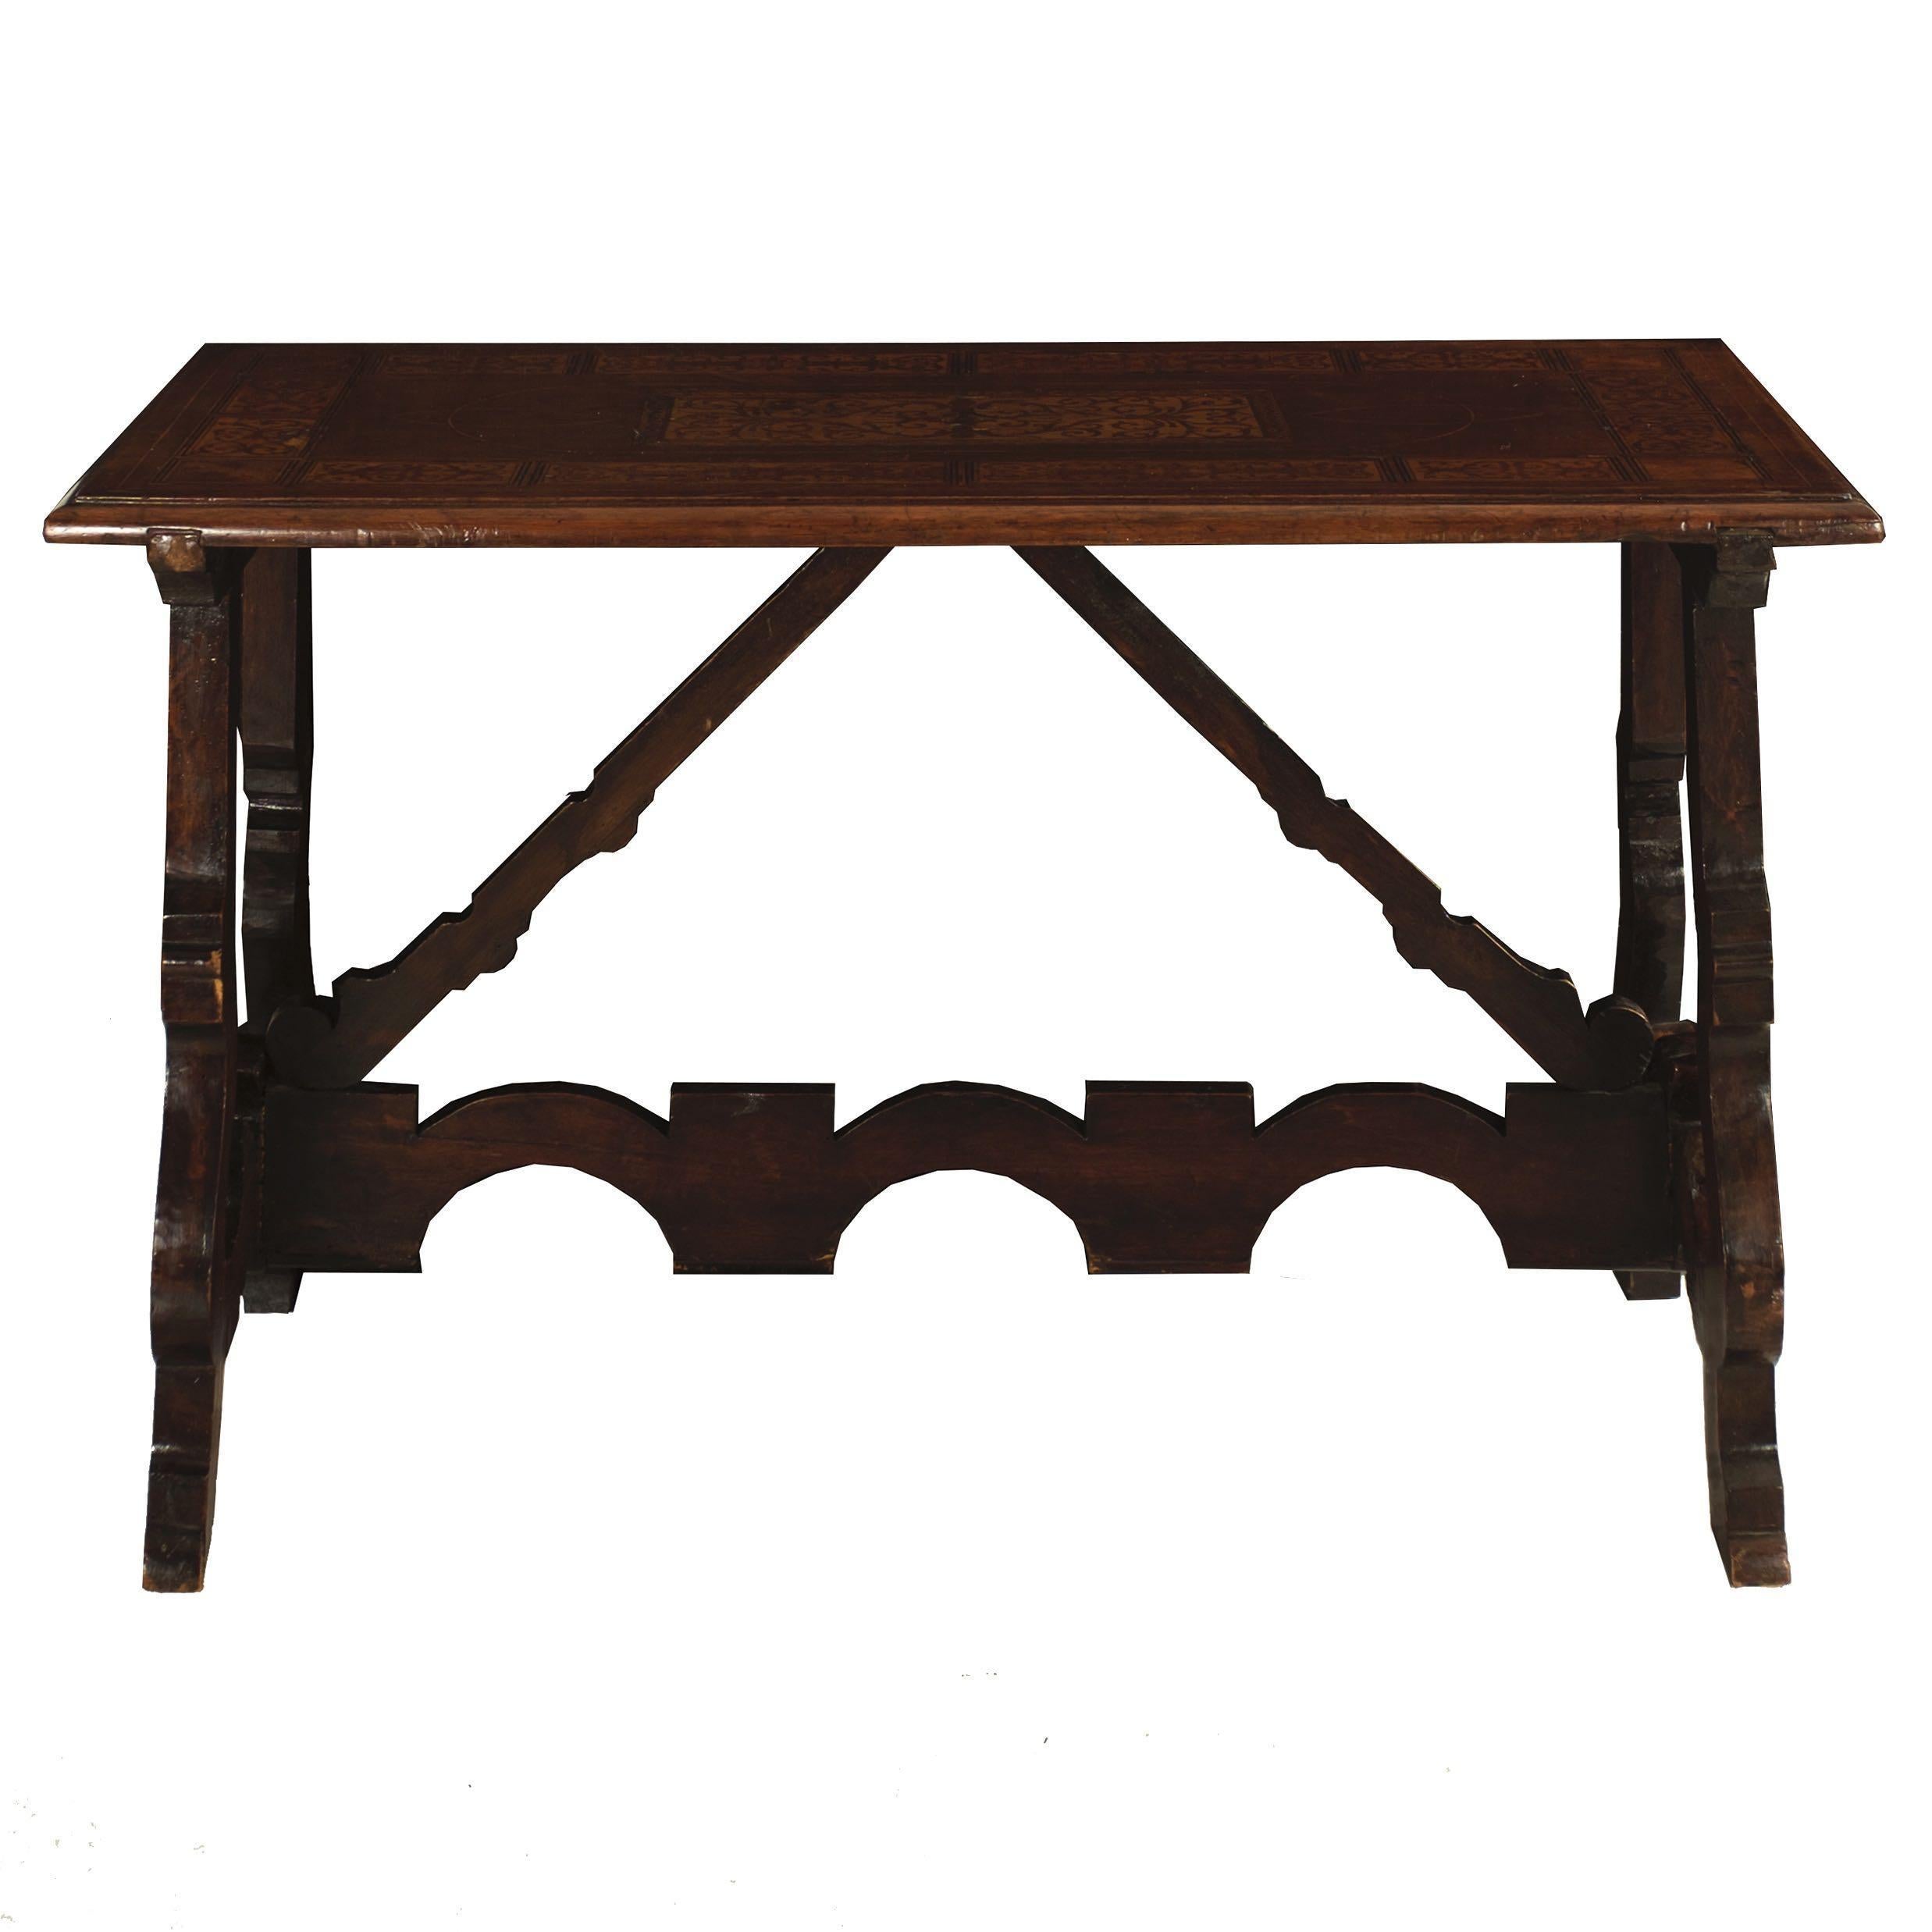 ITALIAN BAROQUE INLAID WALNUT TRESTLE-BASE PIER TABLE
Probably Northern Italy, circa late 17th to early 18th century
Item # 010KTR22J 

Featuring a fine Marquetry inlaid top with wolf figural inlays in each corner, the rectangular top is divided